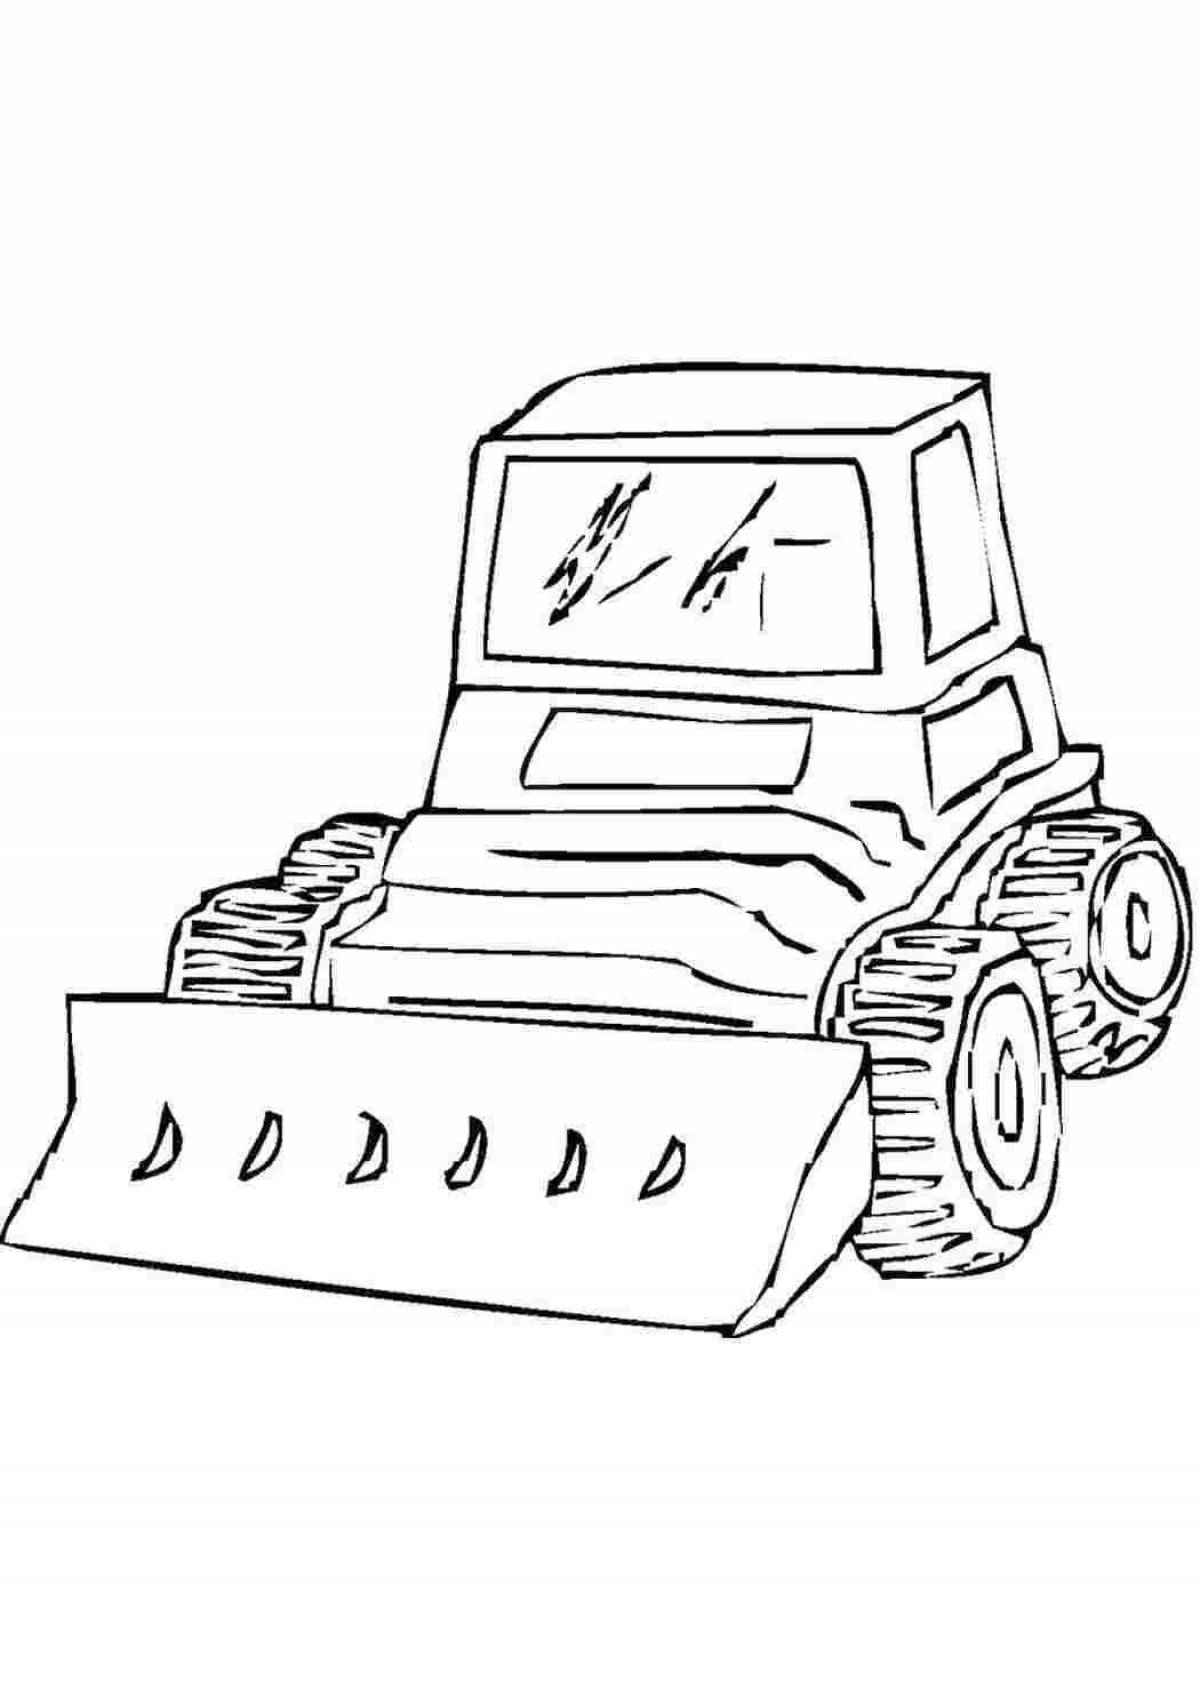 Glorious bulldozer coloring pages for kids